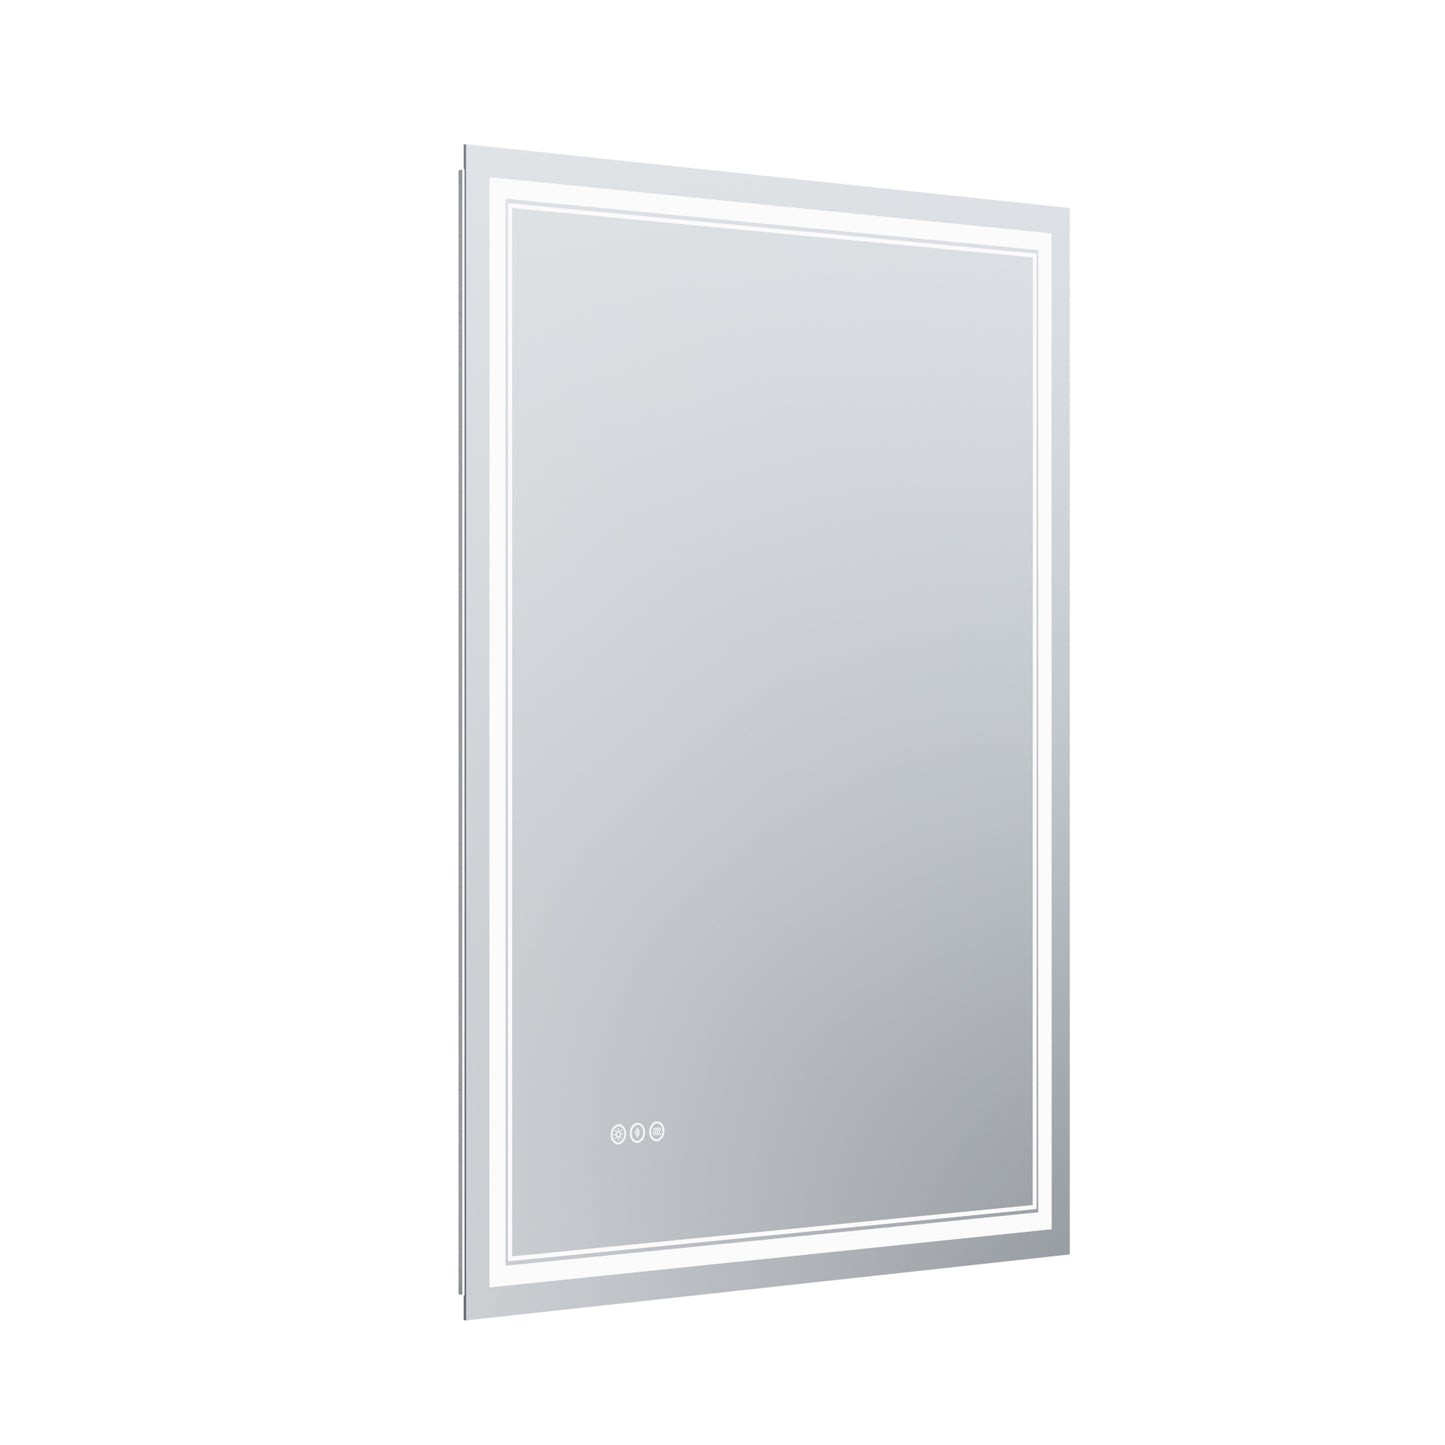 LED Bathroom Mirror, 36x48 inch Bathroom Vanity Mirrors with Lights, Mirrors for Wall with Smart Touch Button, Anti-Fog, Memory Function